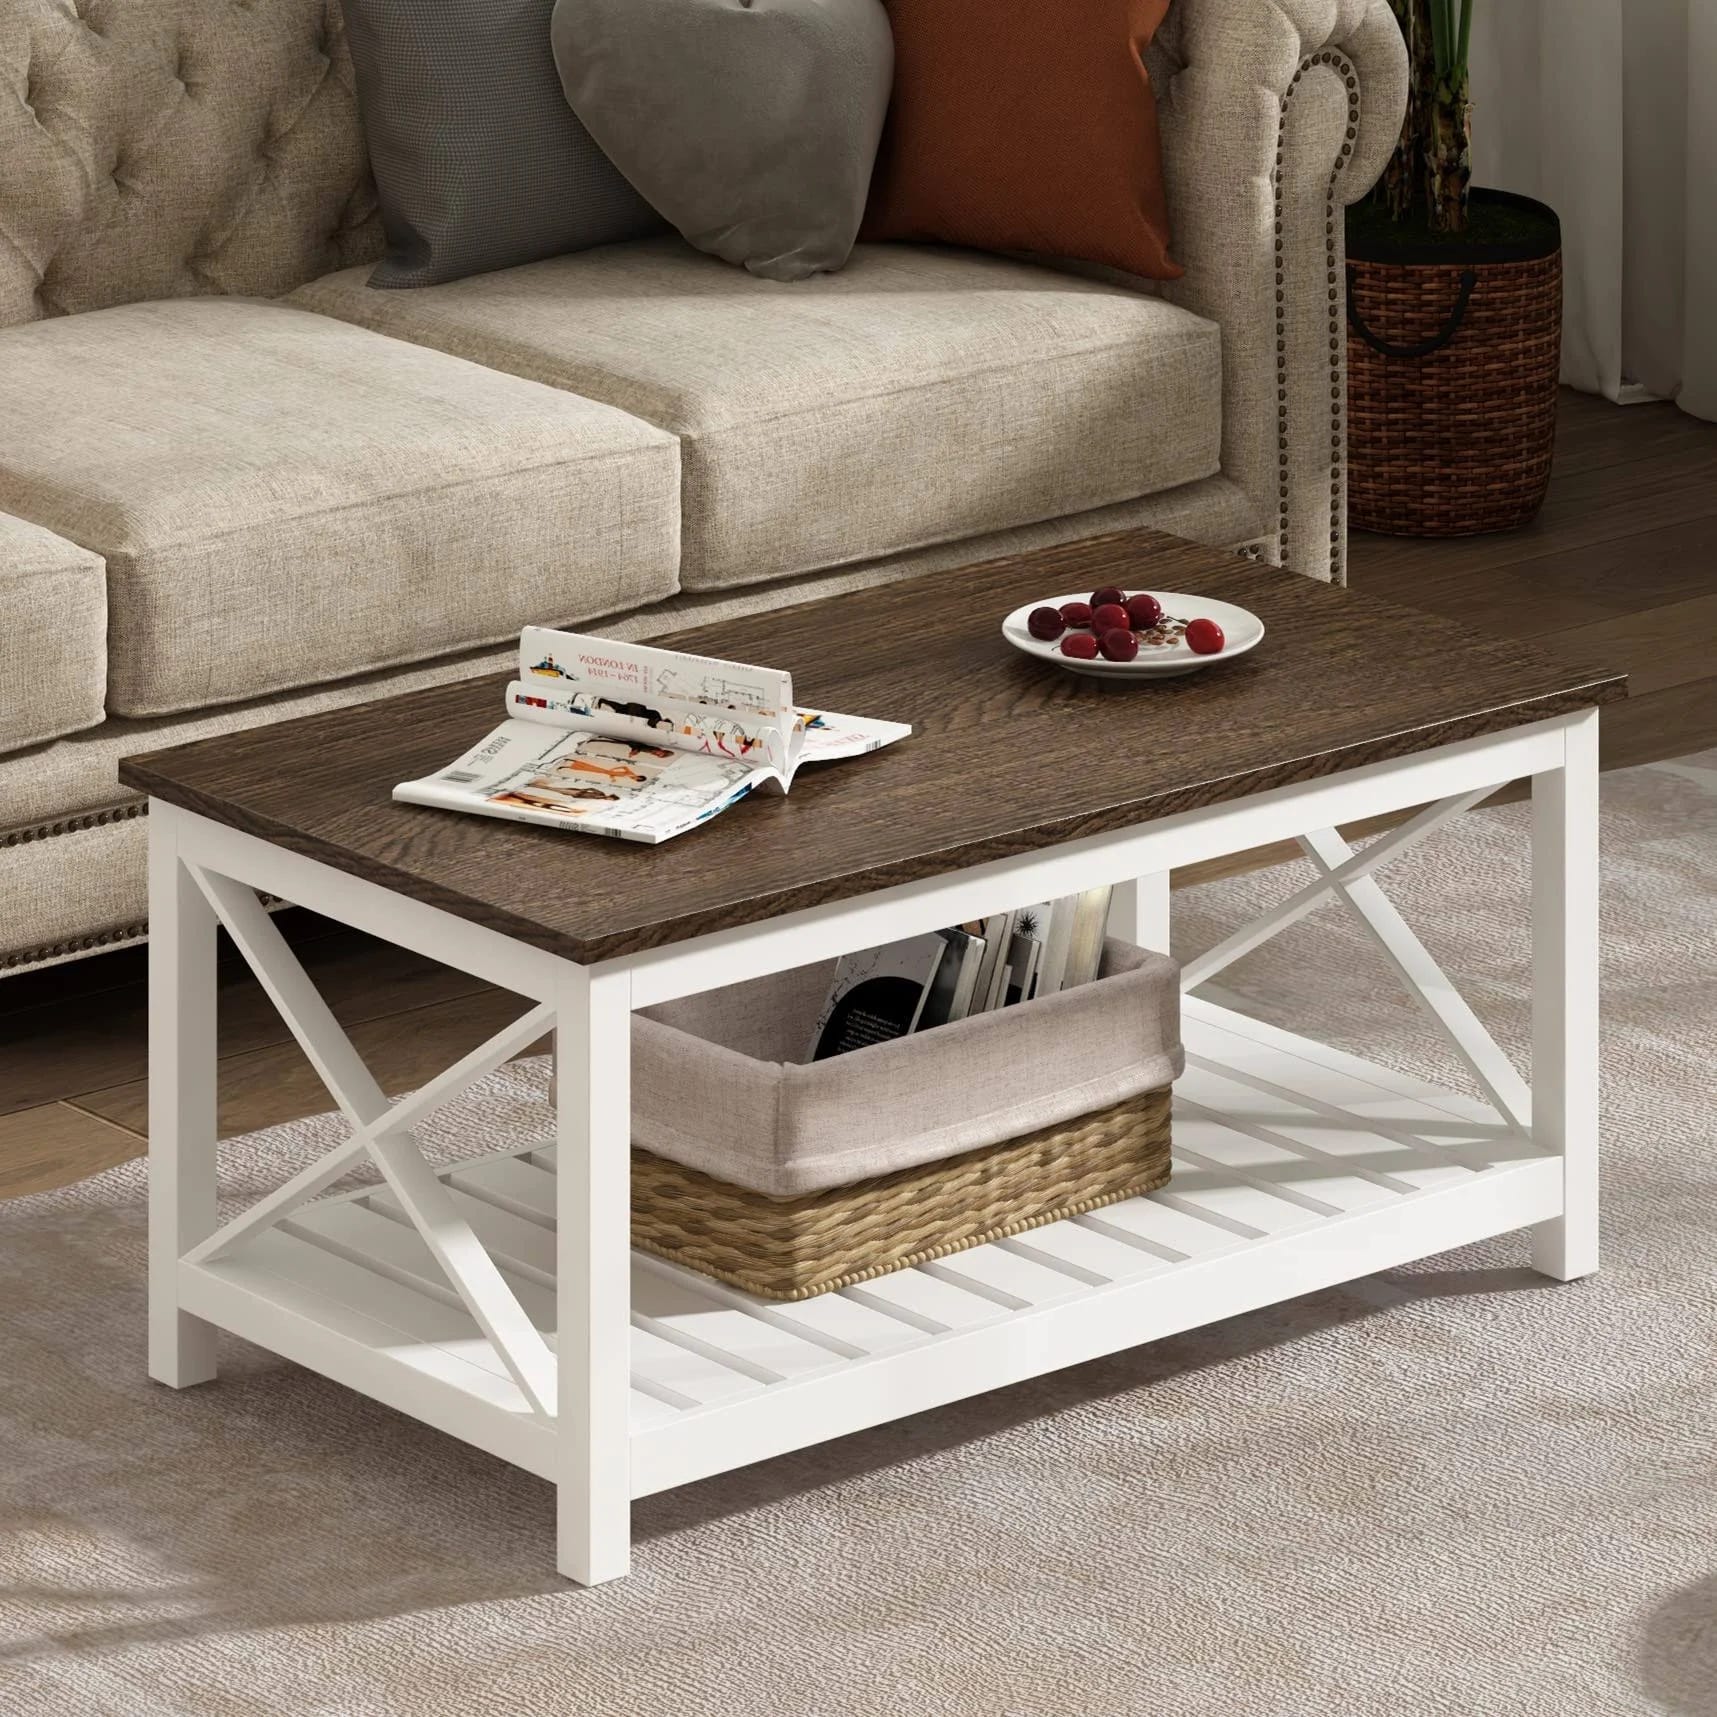 Rustic Farmhouse White Coffee Table with Shelf | Image